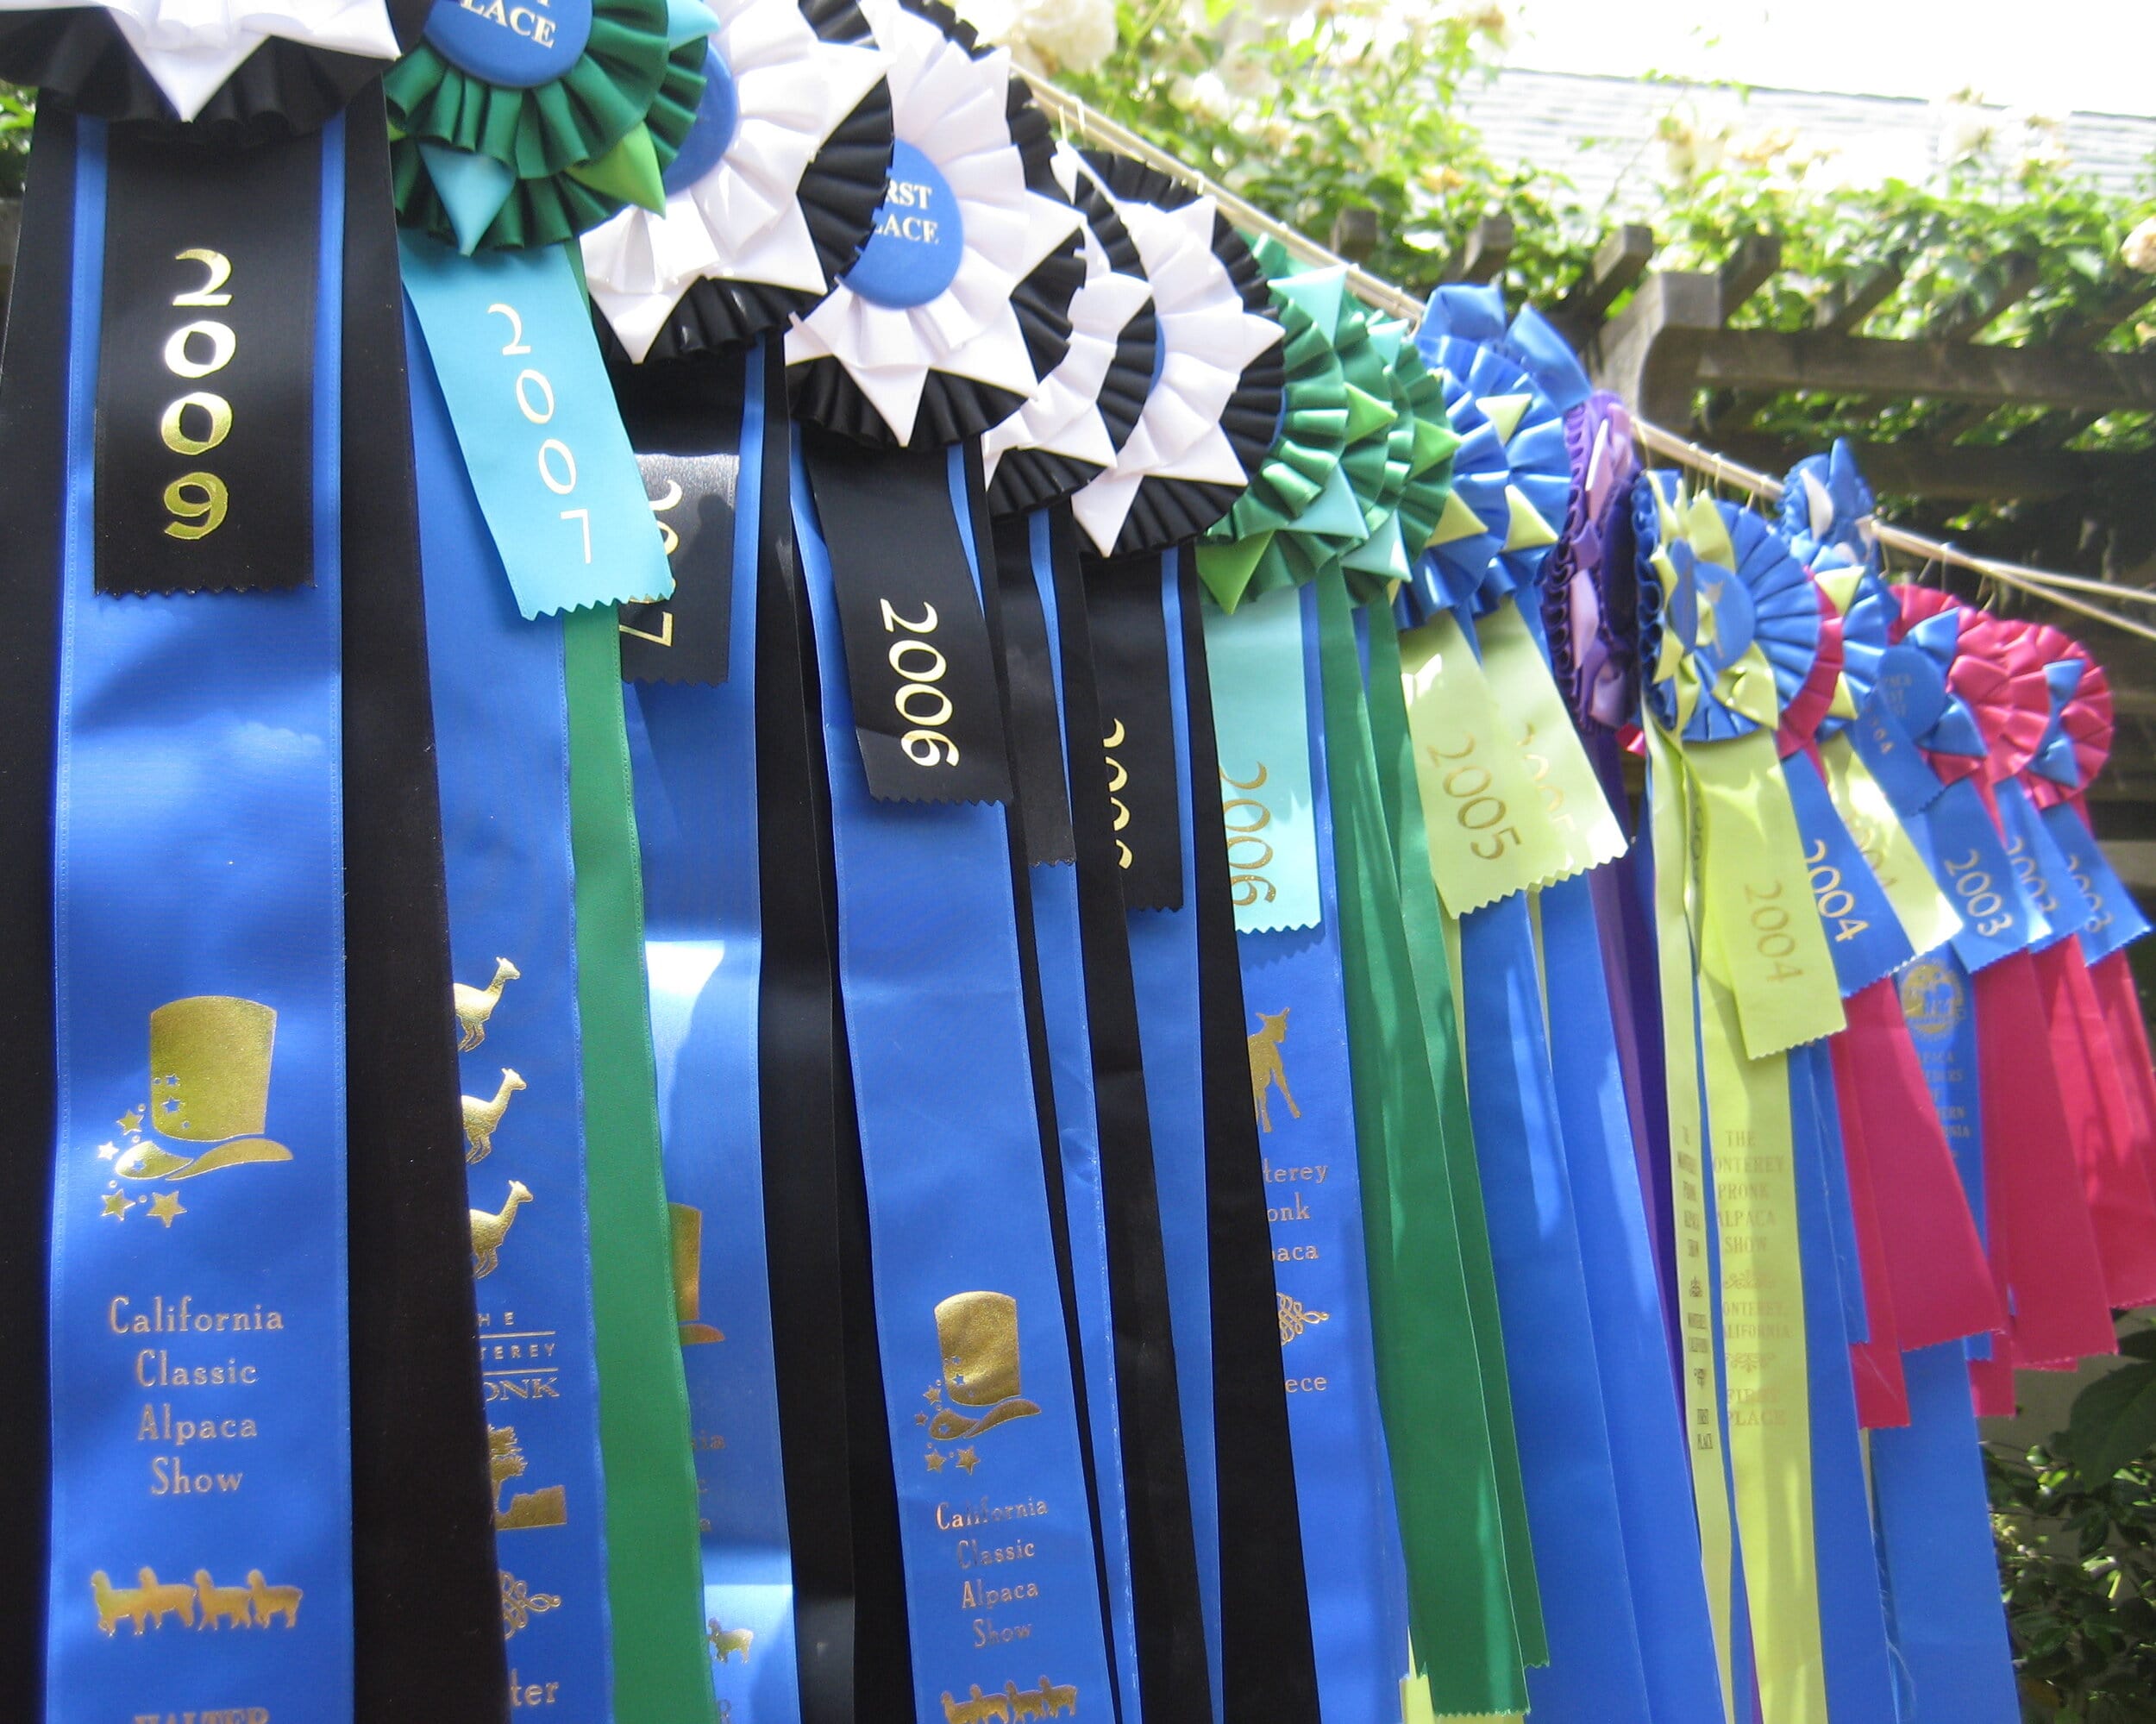 A collection of ribbons and awards for outstanding livestock quality